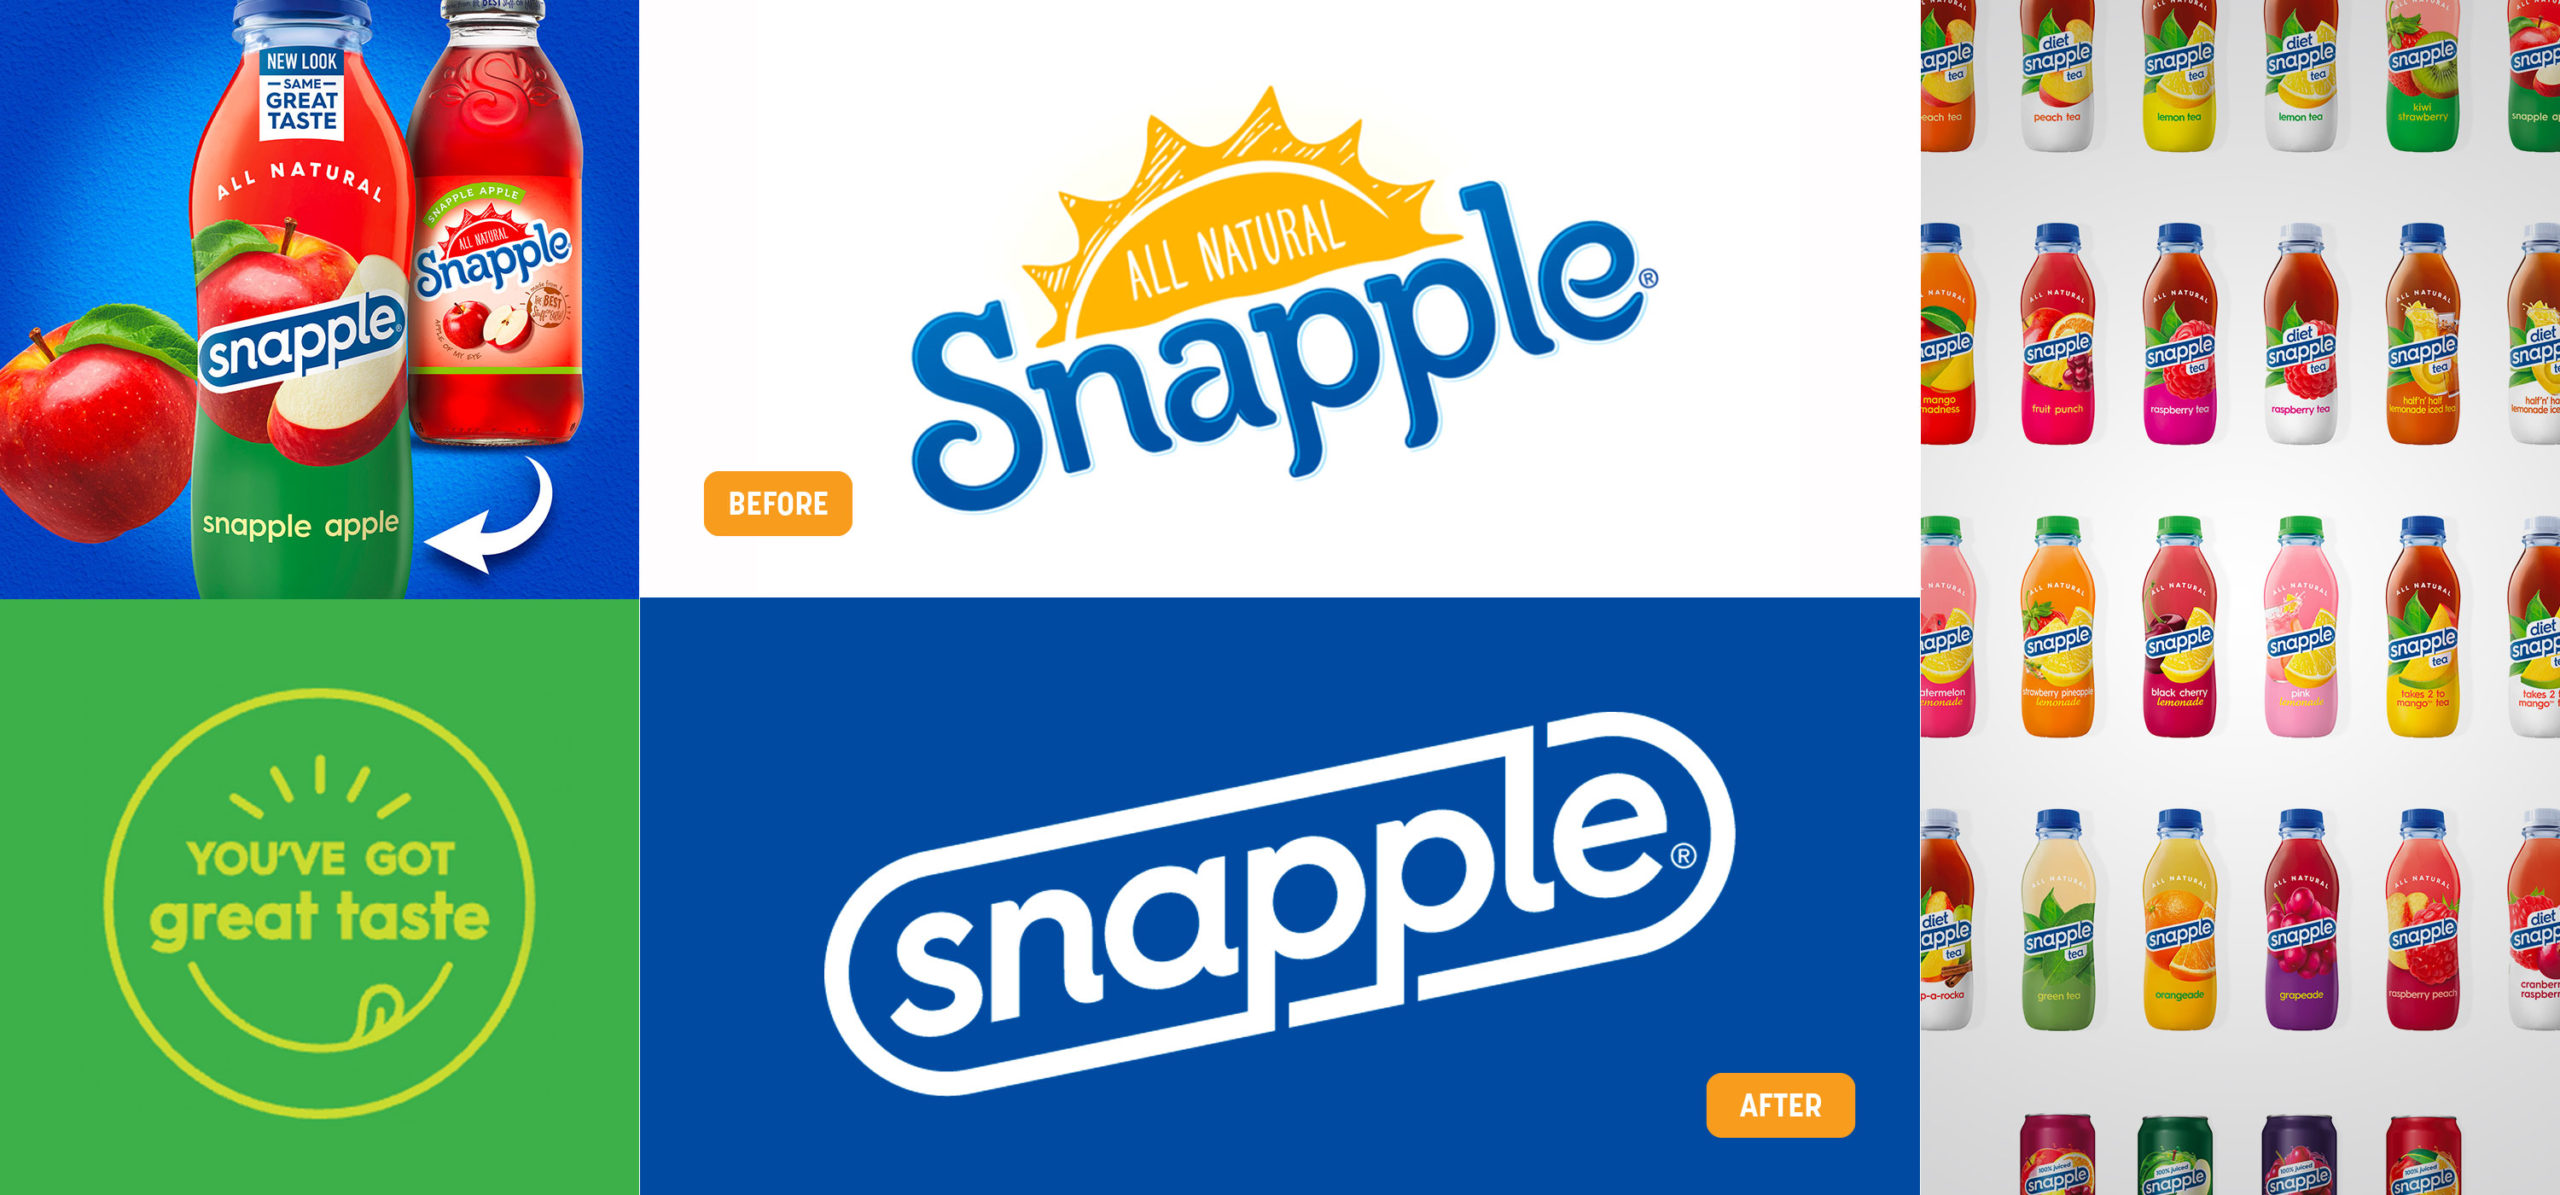 The Reasons Behind Snapple's Shift from Glass to Plastic Packaging